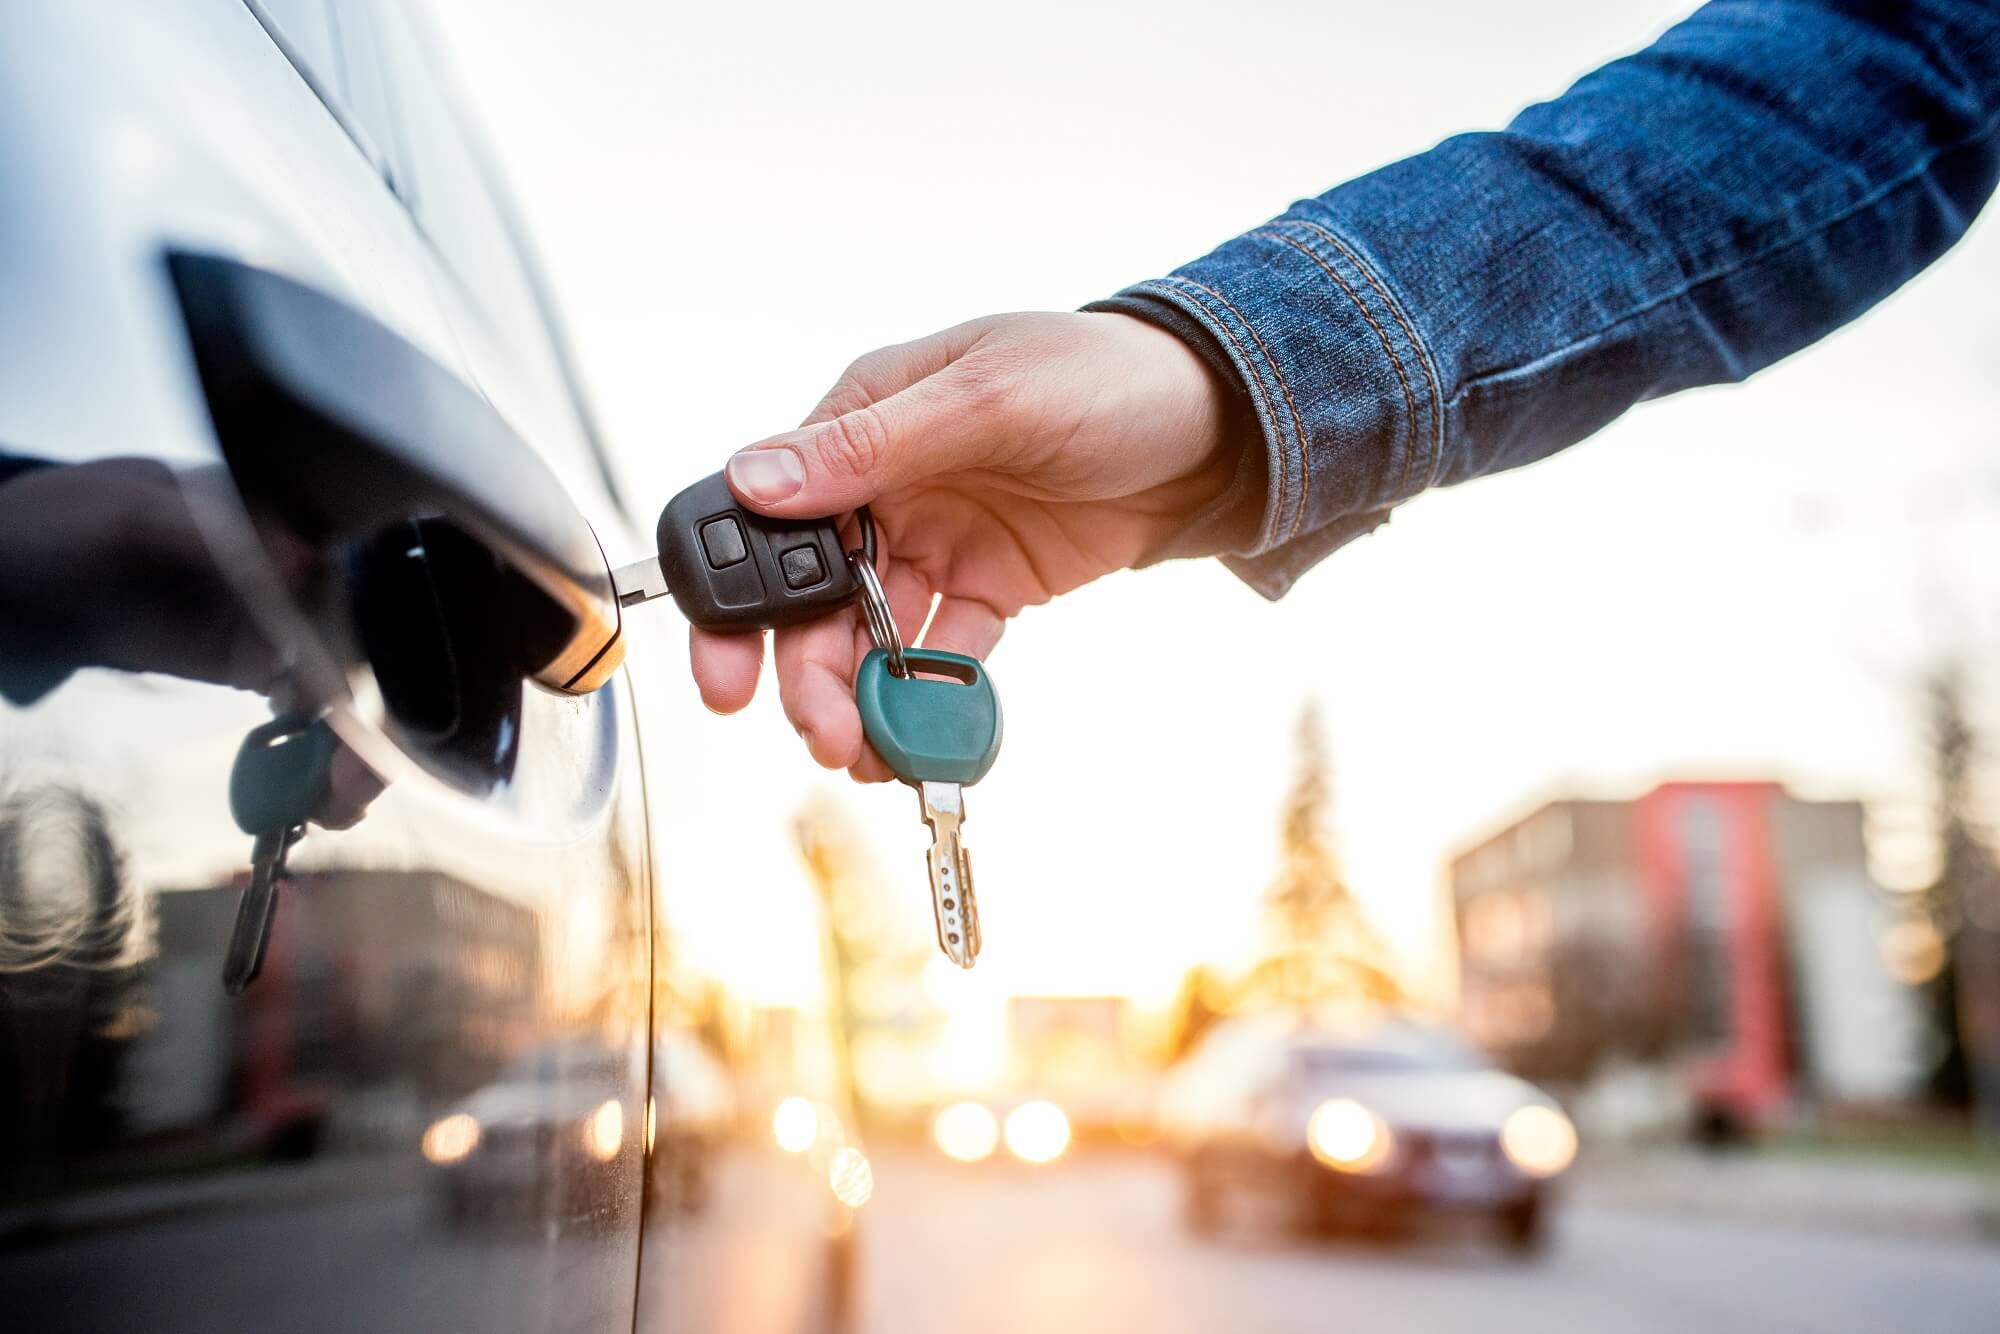 Brits spend 1460 minutes per year looking for car keys